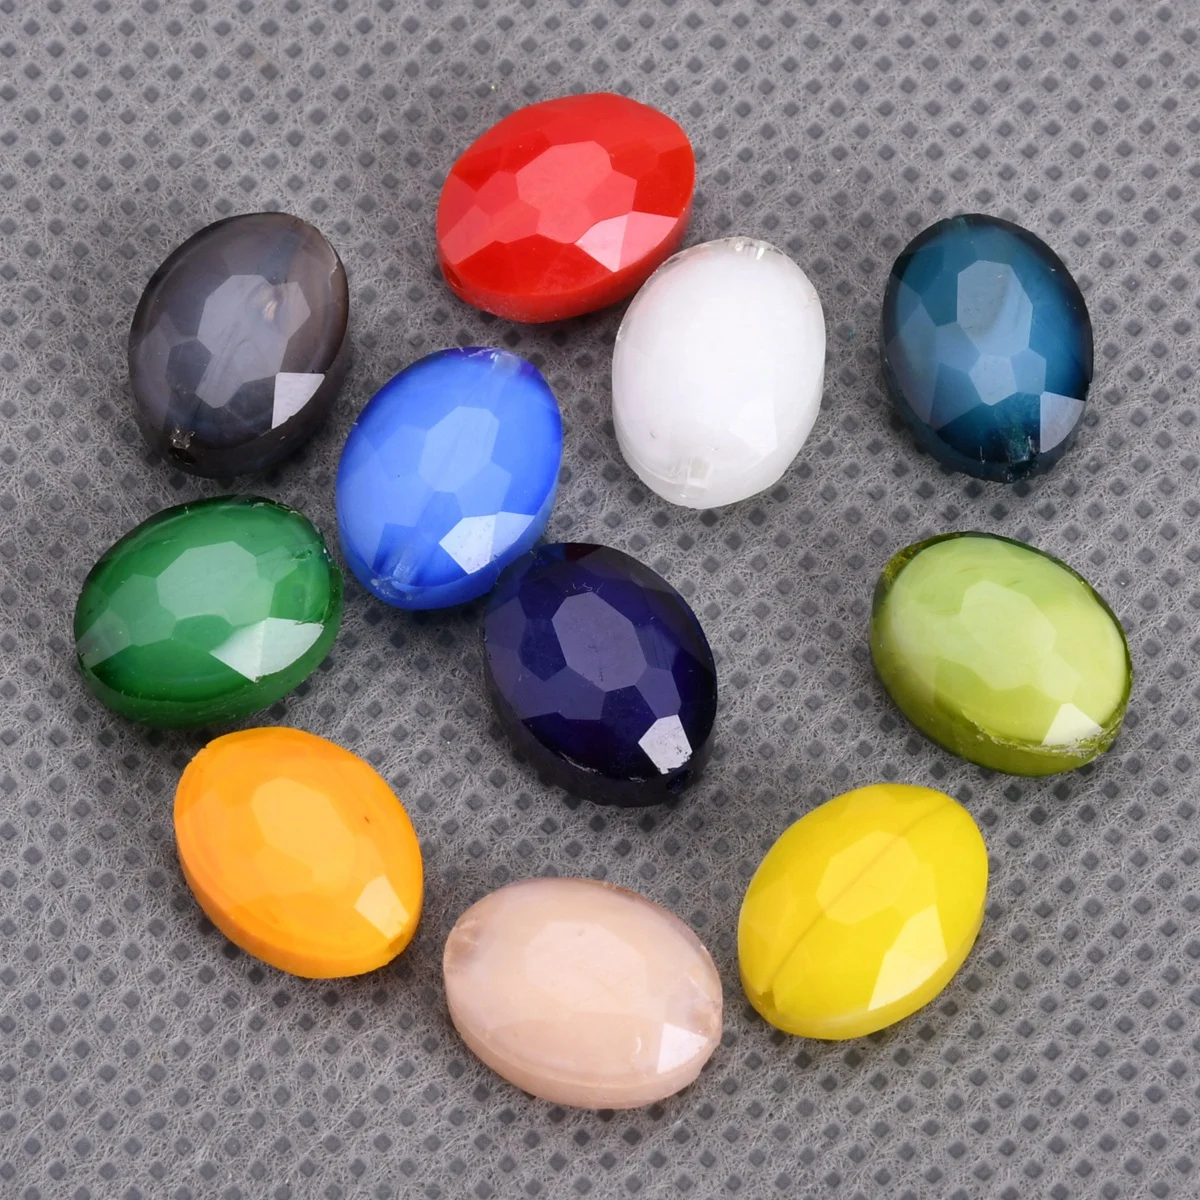 

10pcs Oval Shape 12x9mm Opaque Faceted Glass Loose Beads For Jewelry Making DIY Crafts Findings